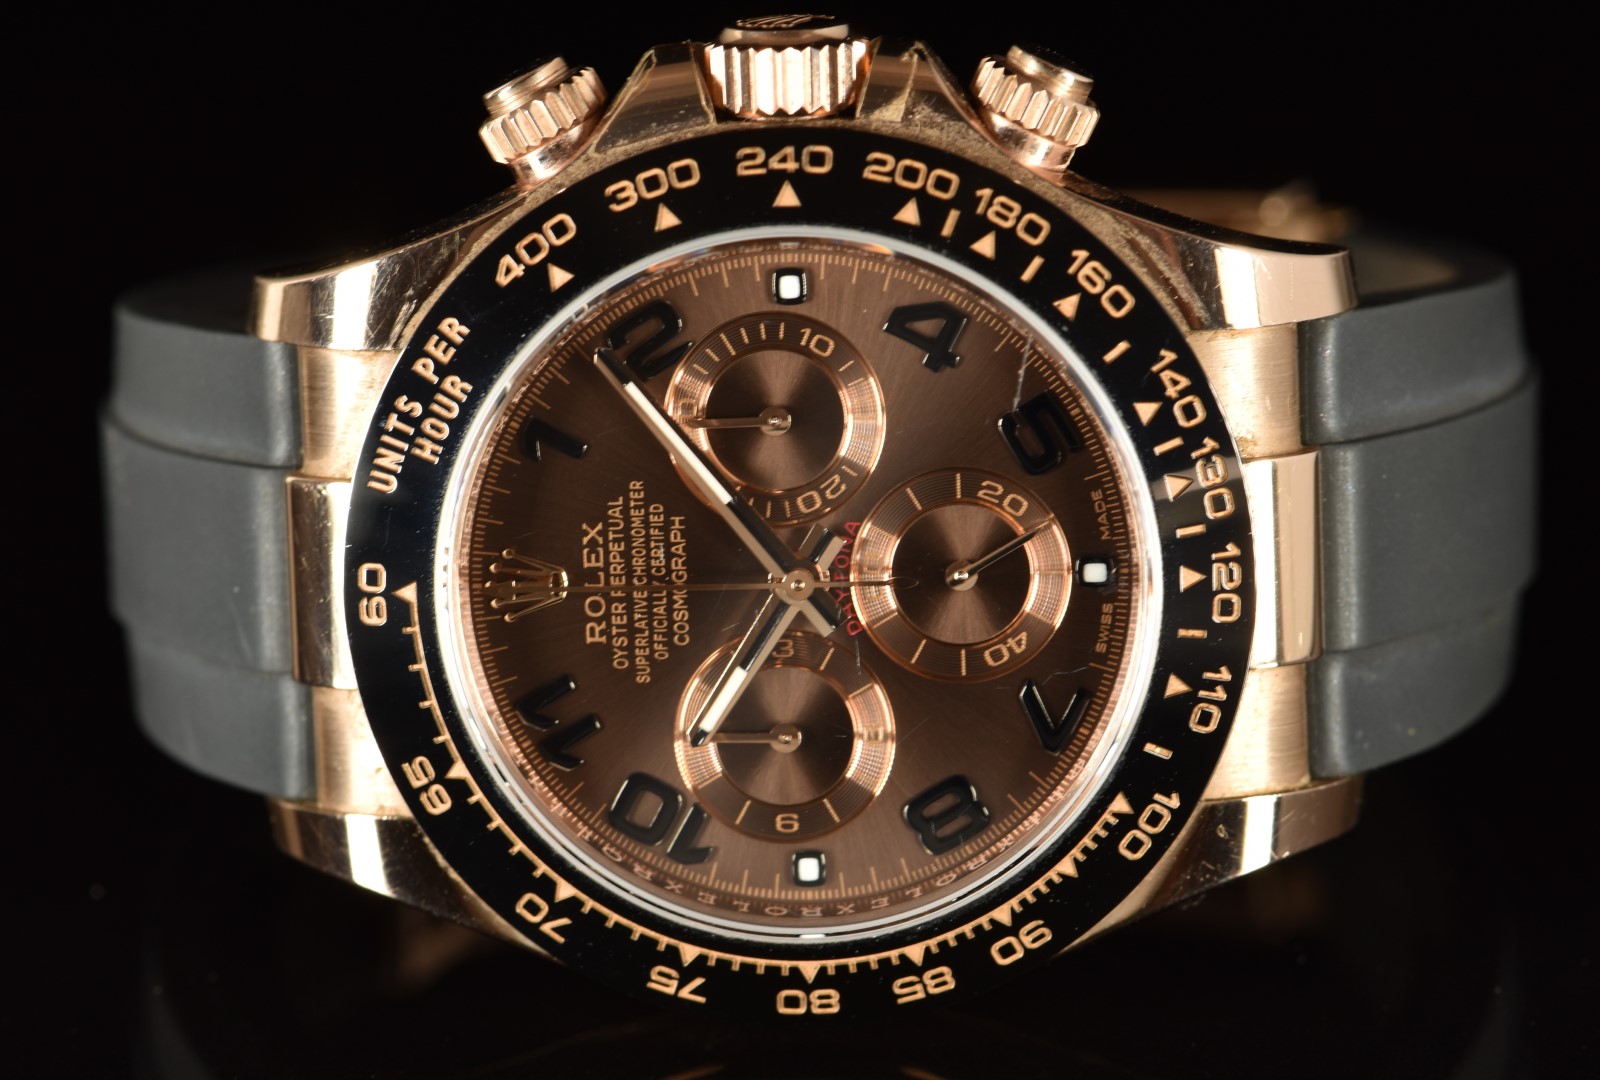 Rolex Oyster perpetual Cosmograph Daytona 18ct 'Everose' gold automatic chronograph wristwatch - Image 5 of 14